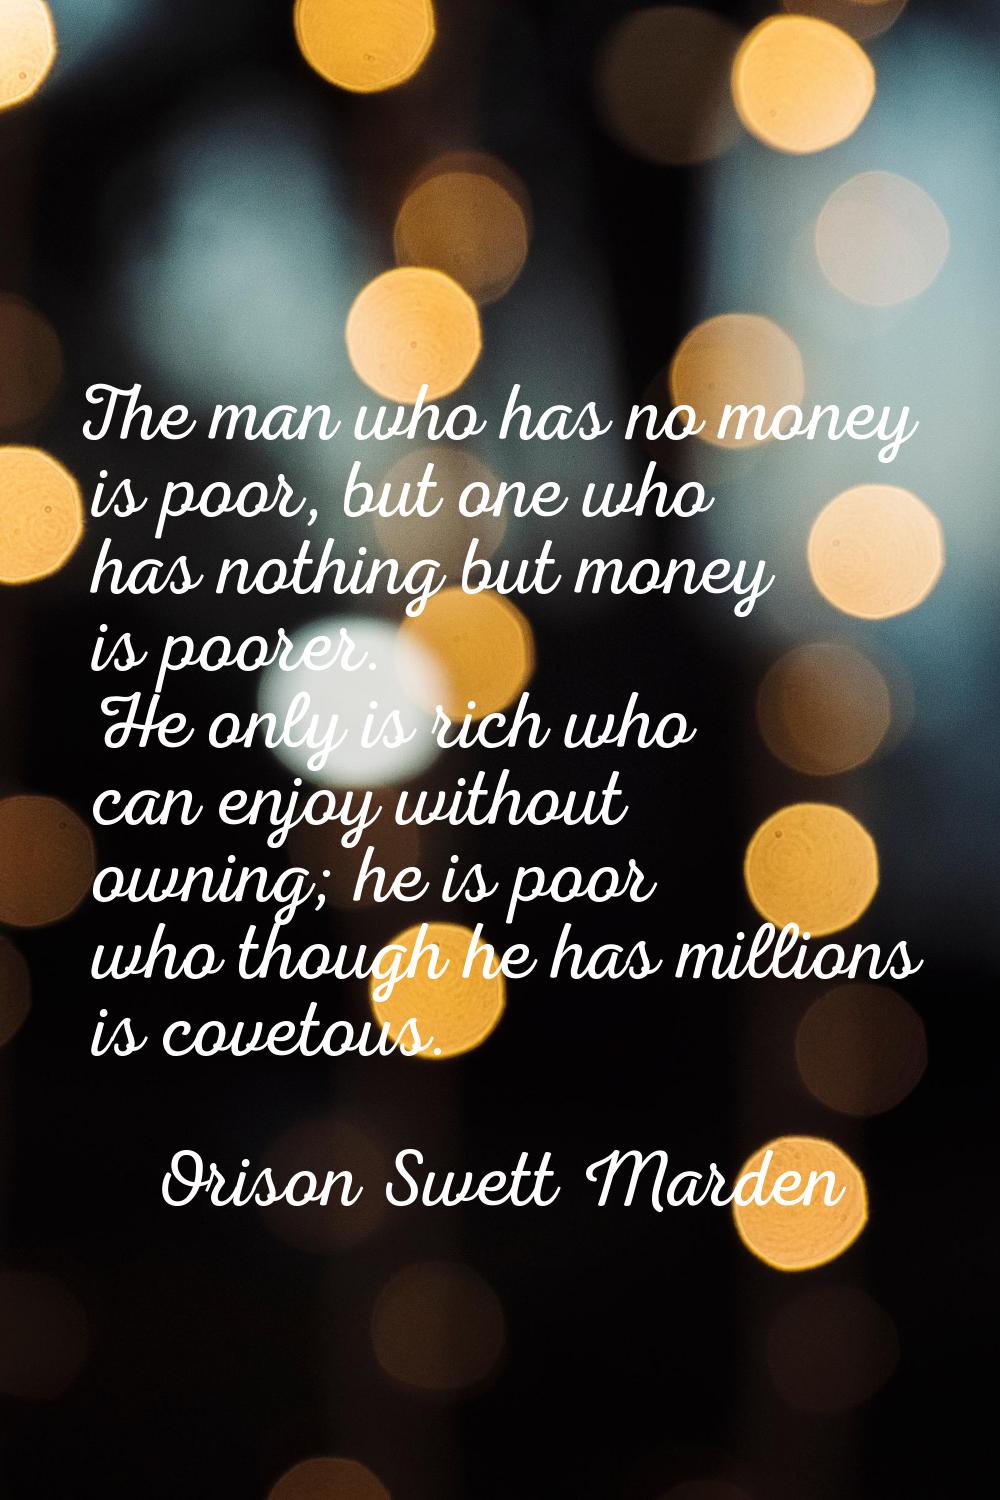 The man who has no money is poor, but one who has nothing but money is poorer. He only is rich who 